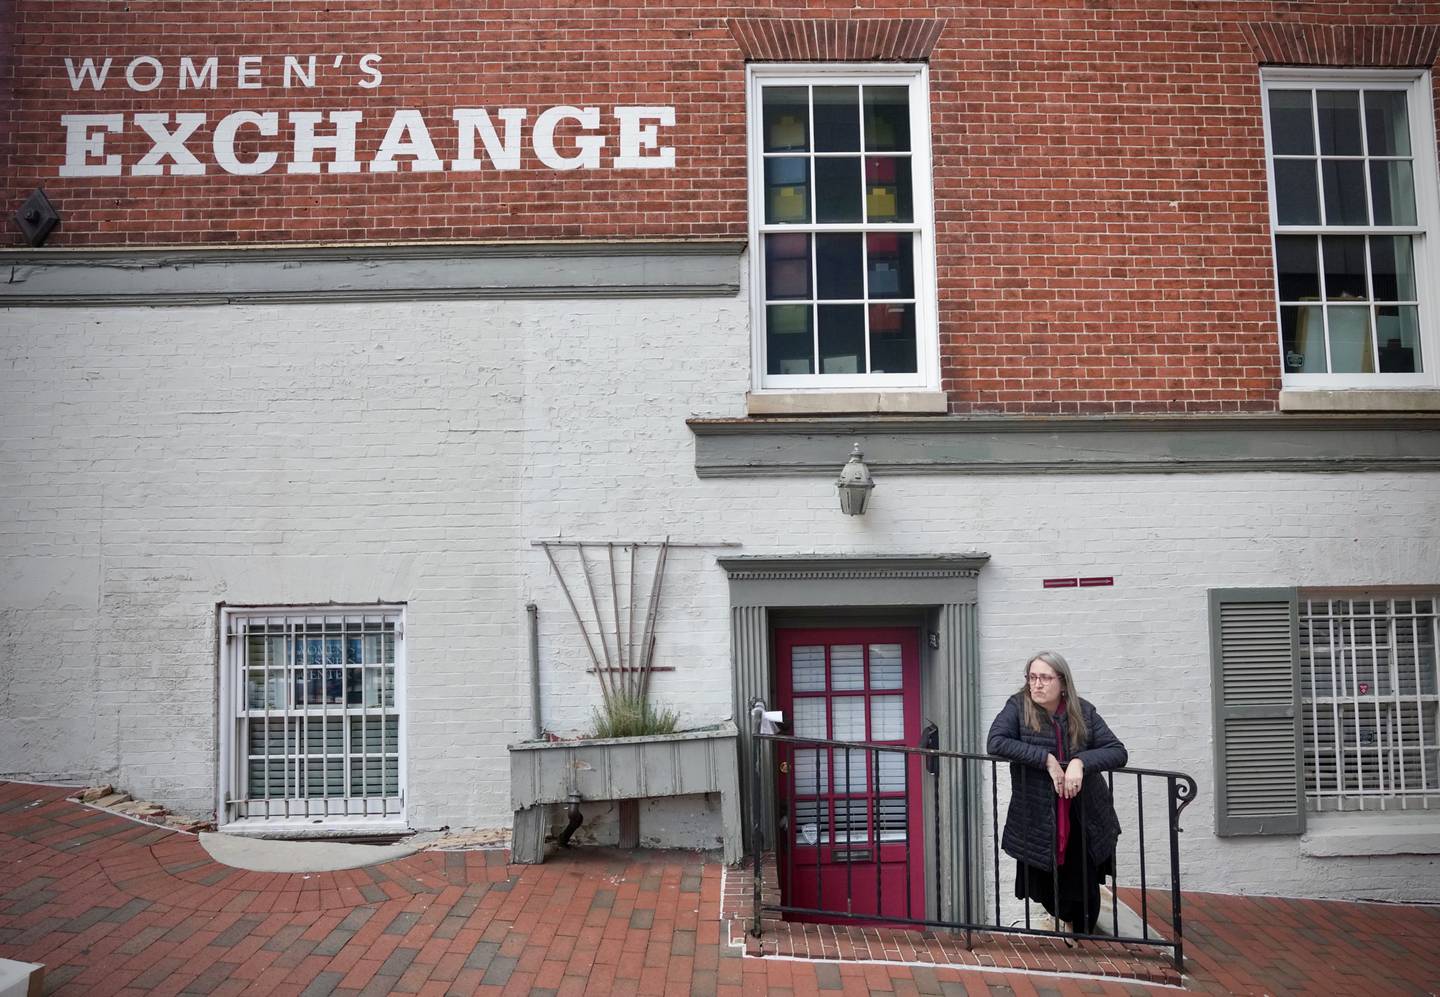 Layne Bosserman, a librarian with Pratt, worked as a waitress for the Women’s Industrial Exchange back in the 1990s. She is volunteering with the MWHC to help with the research and oral history. She is pictured outside the historic building on March 29, 2023.